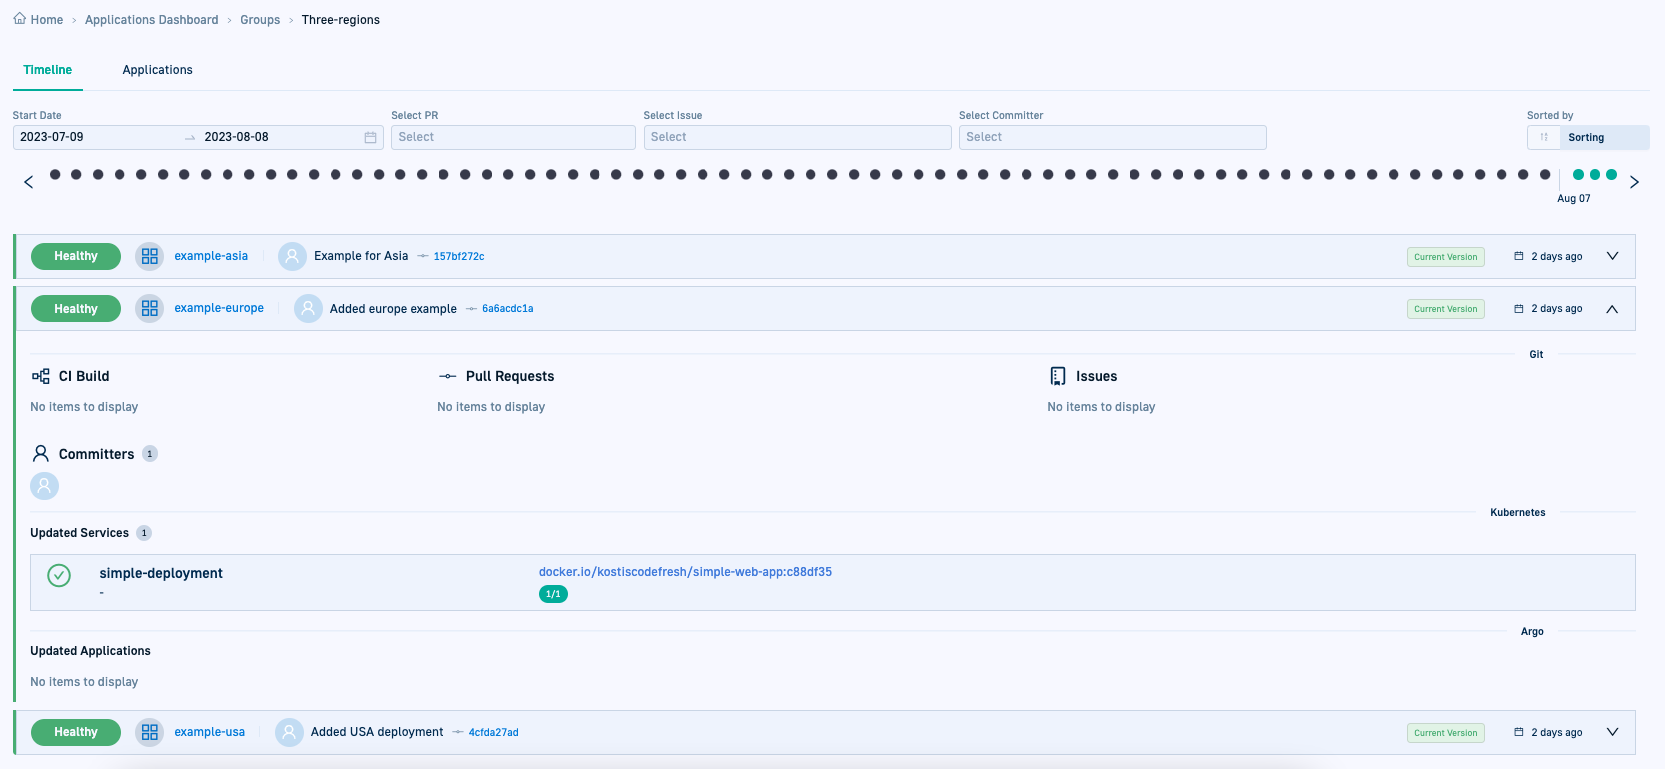 Application Group: Timeline view